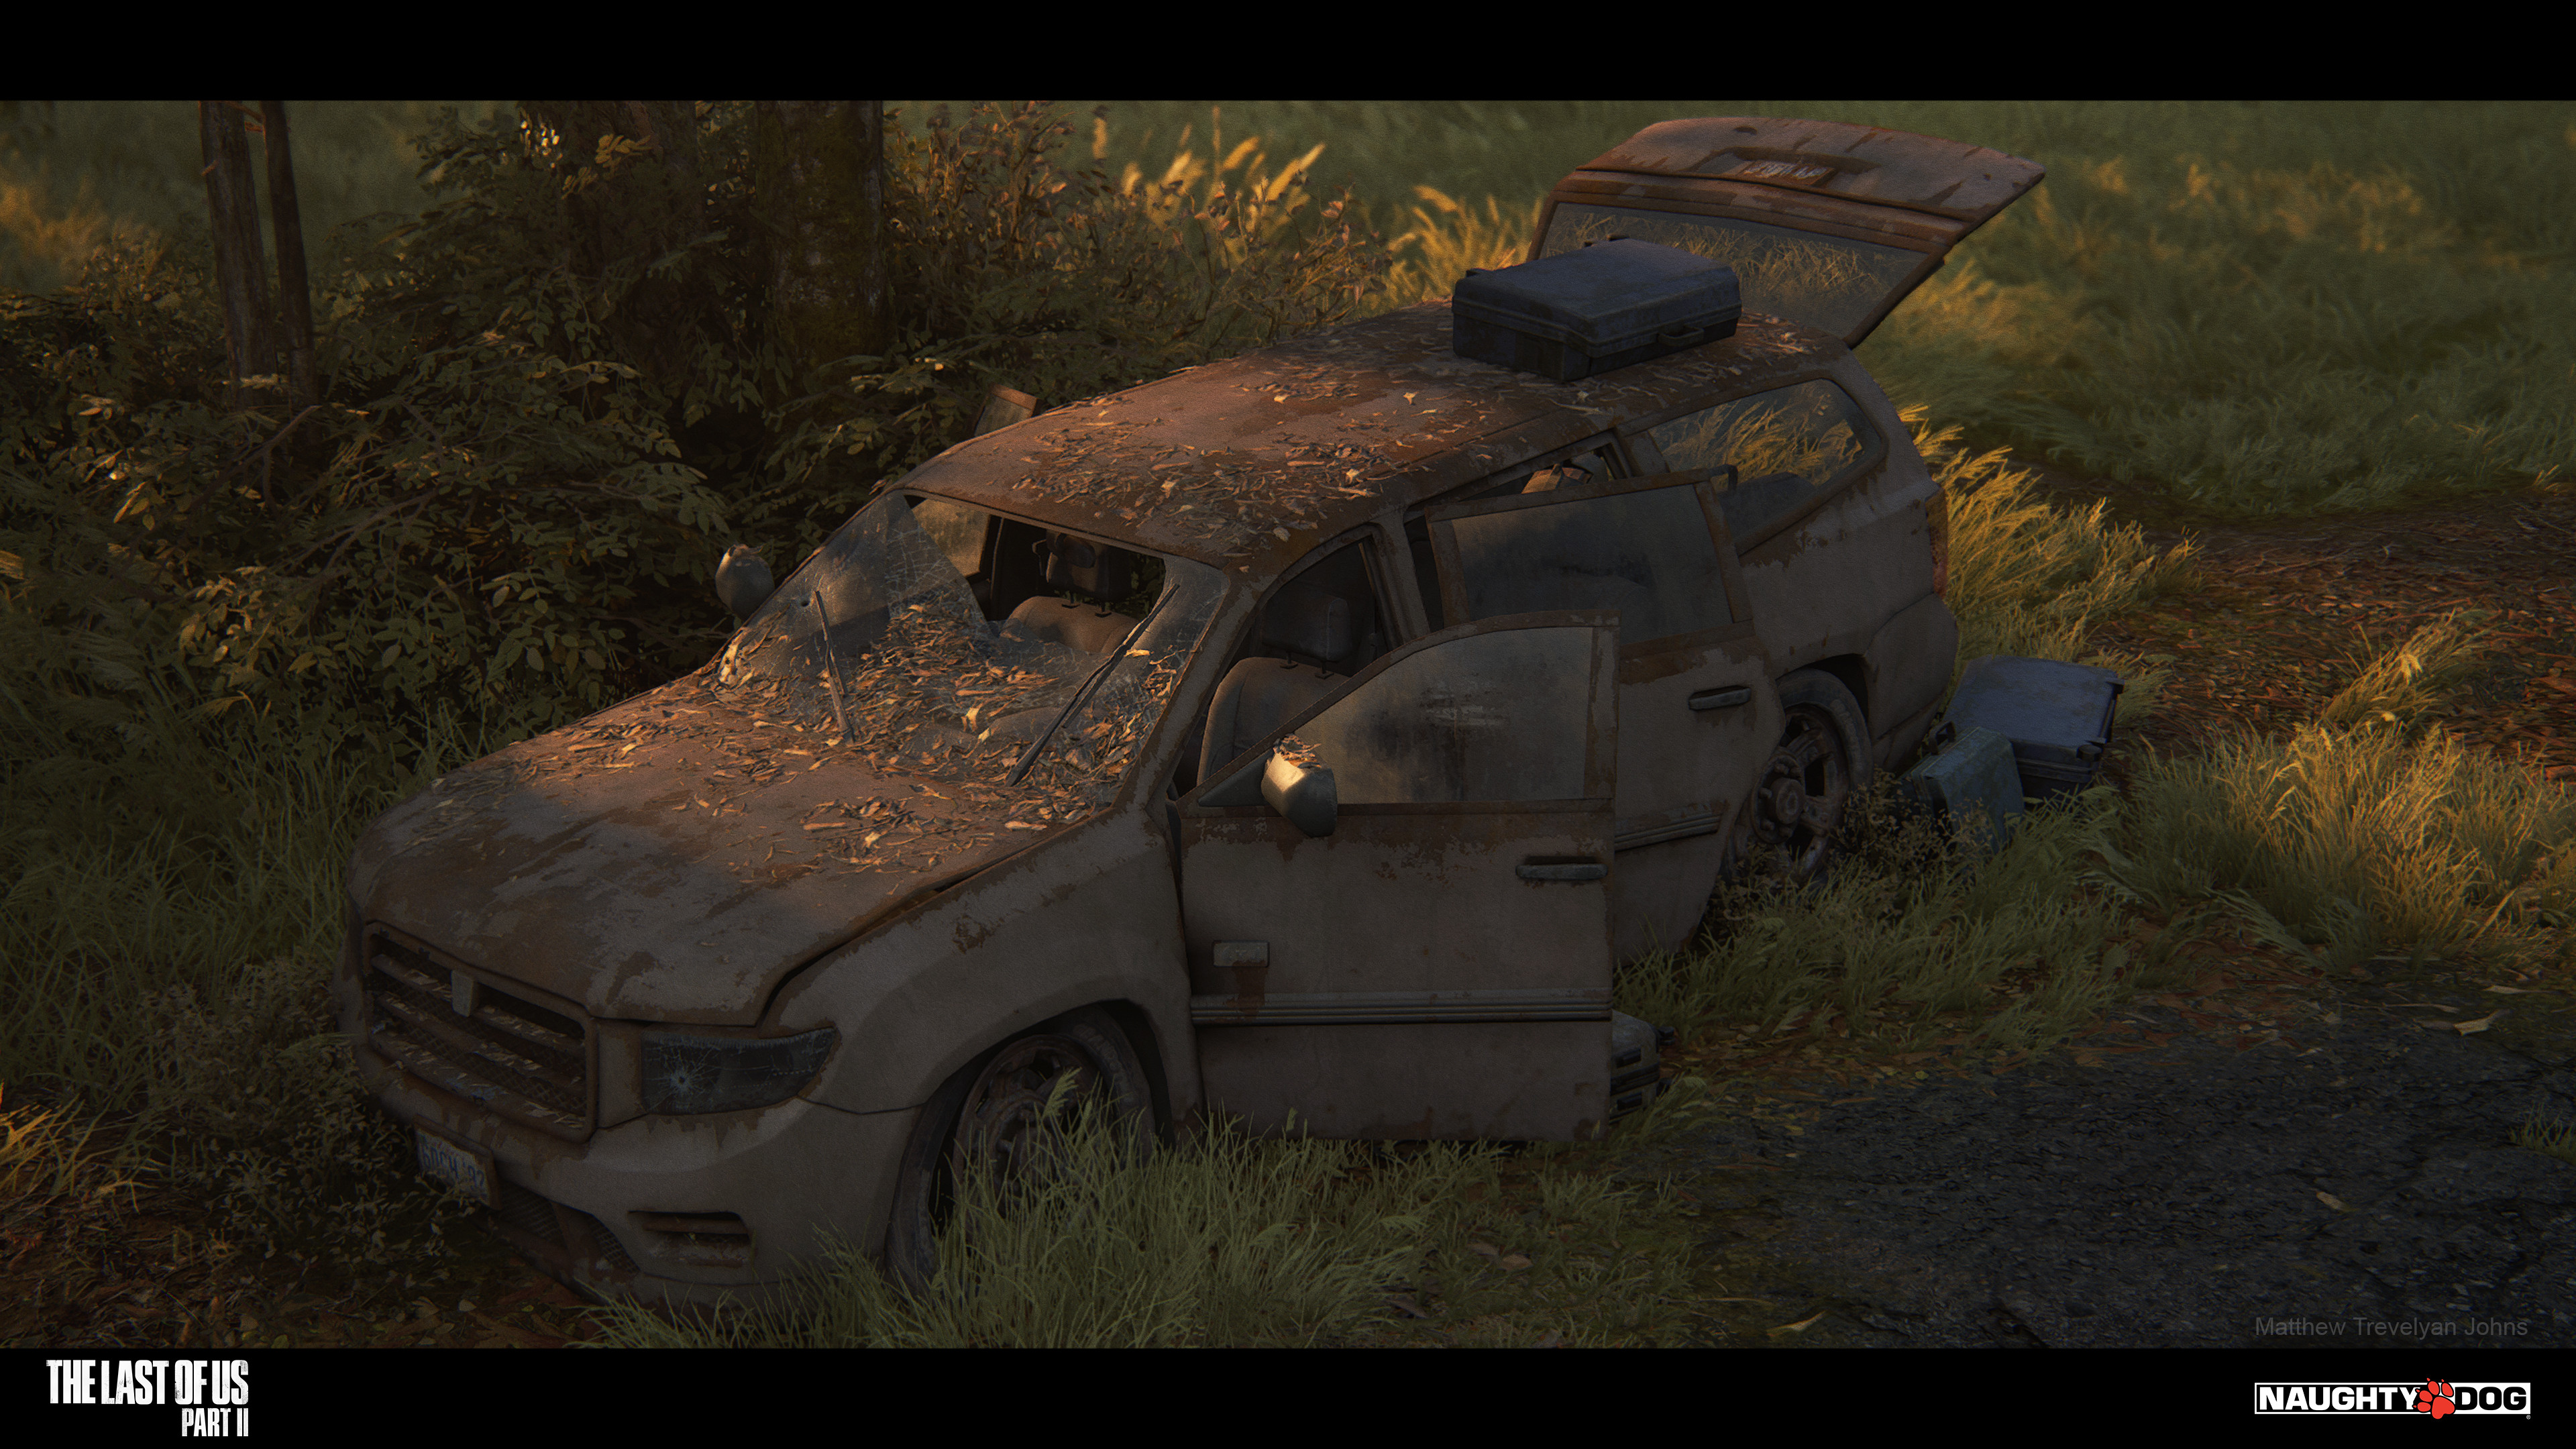 Reuben and Tiffany also did a great job in applying the 'move-mod' system that I supported Ke Xu in implementing. It allows for vehicles to be posed for a more dynamic appearance with very little additional mesh cost